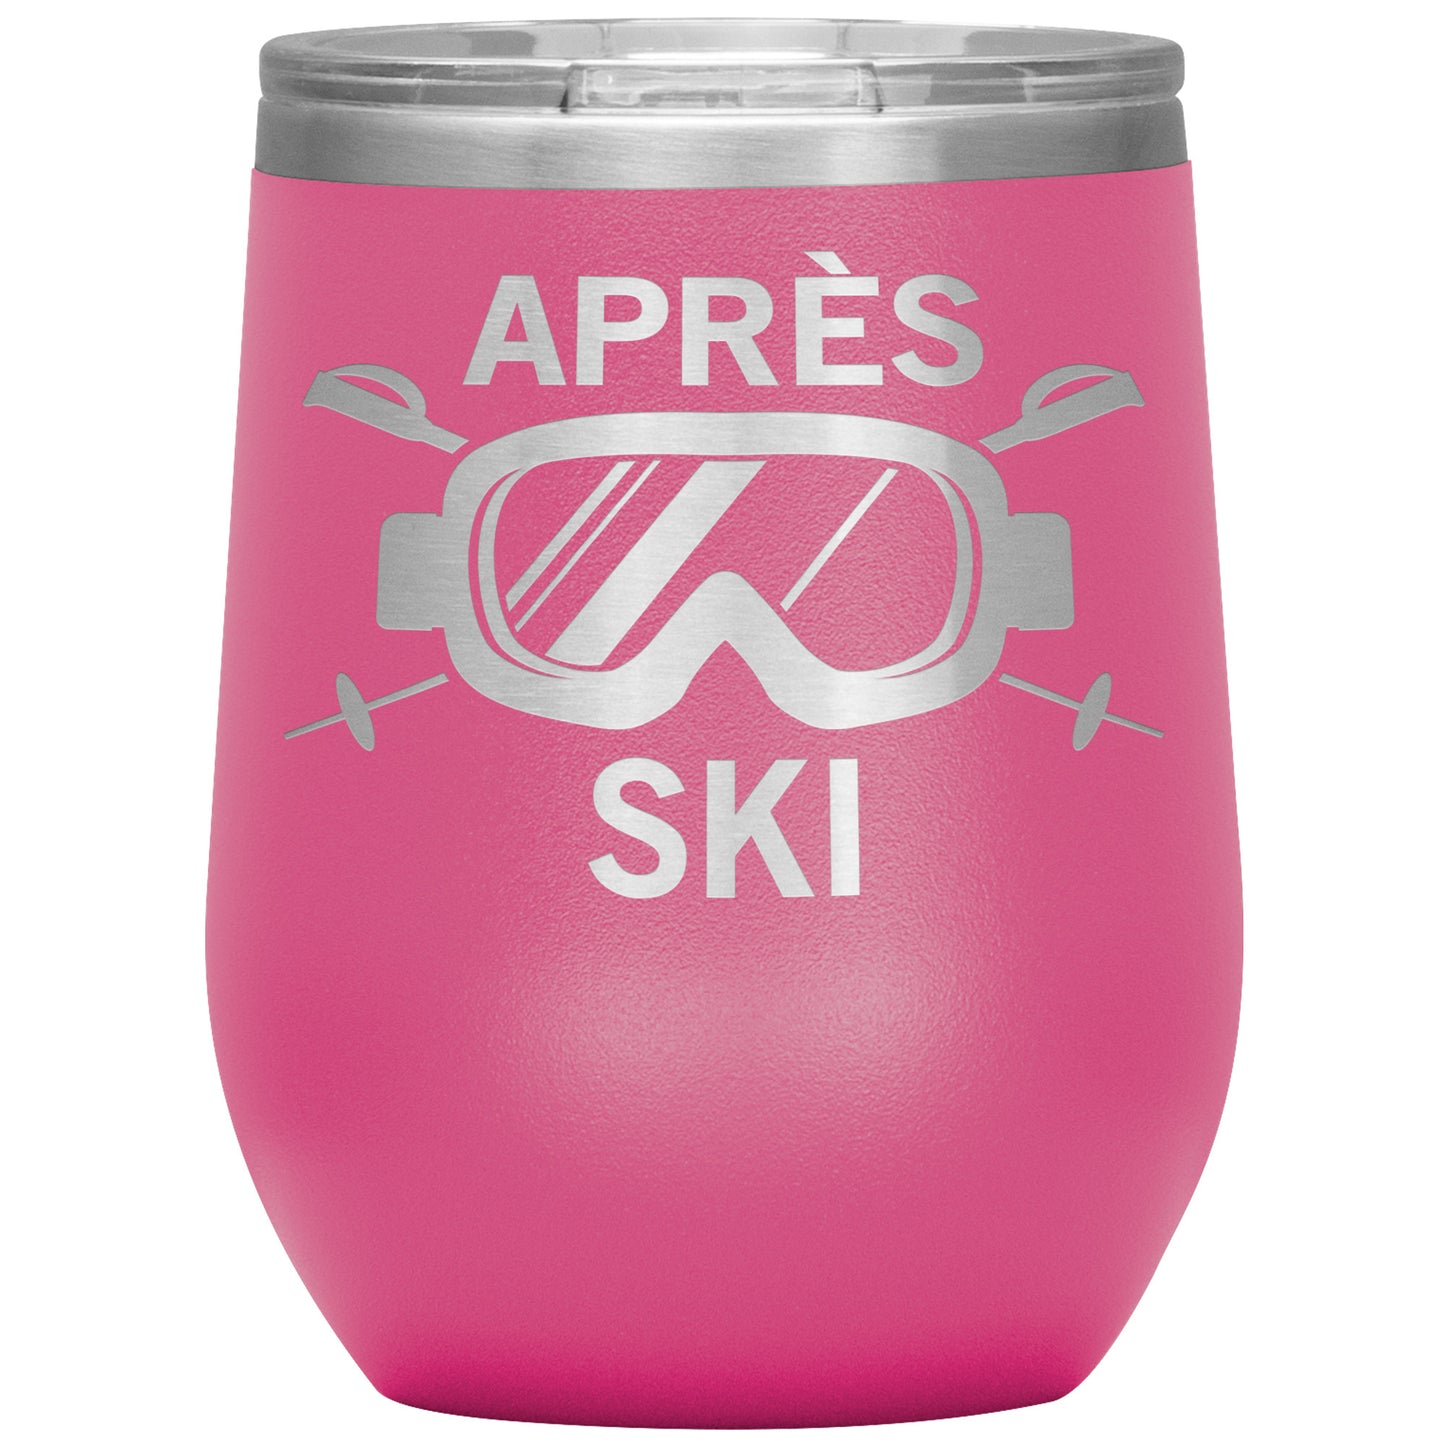 Apres Ski Wine Tumbler Mug, Skiing Decor Winter Glassware Holiday Party Resort Stemless Insulated Stainless Steel 12 oz Cup Favors Weekend